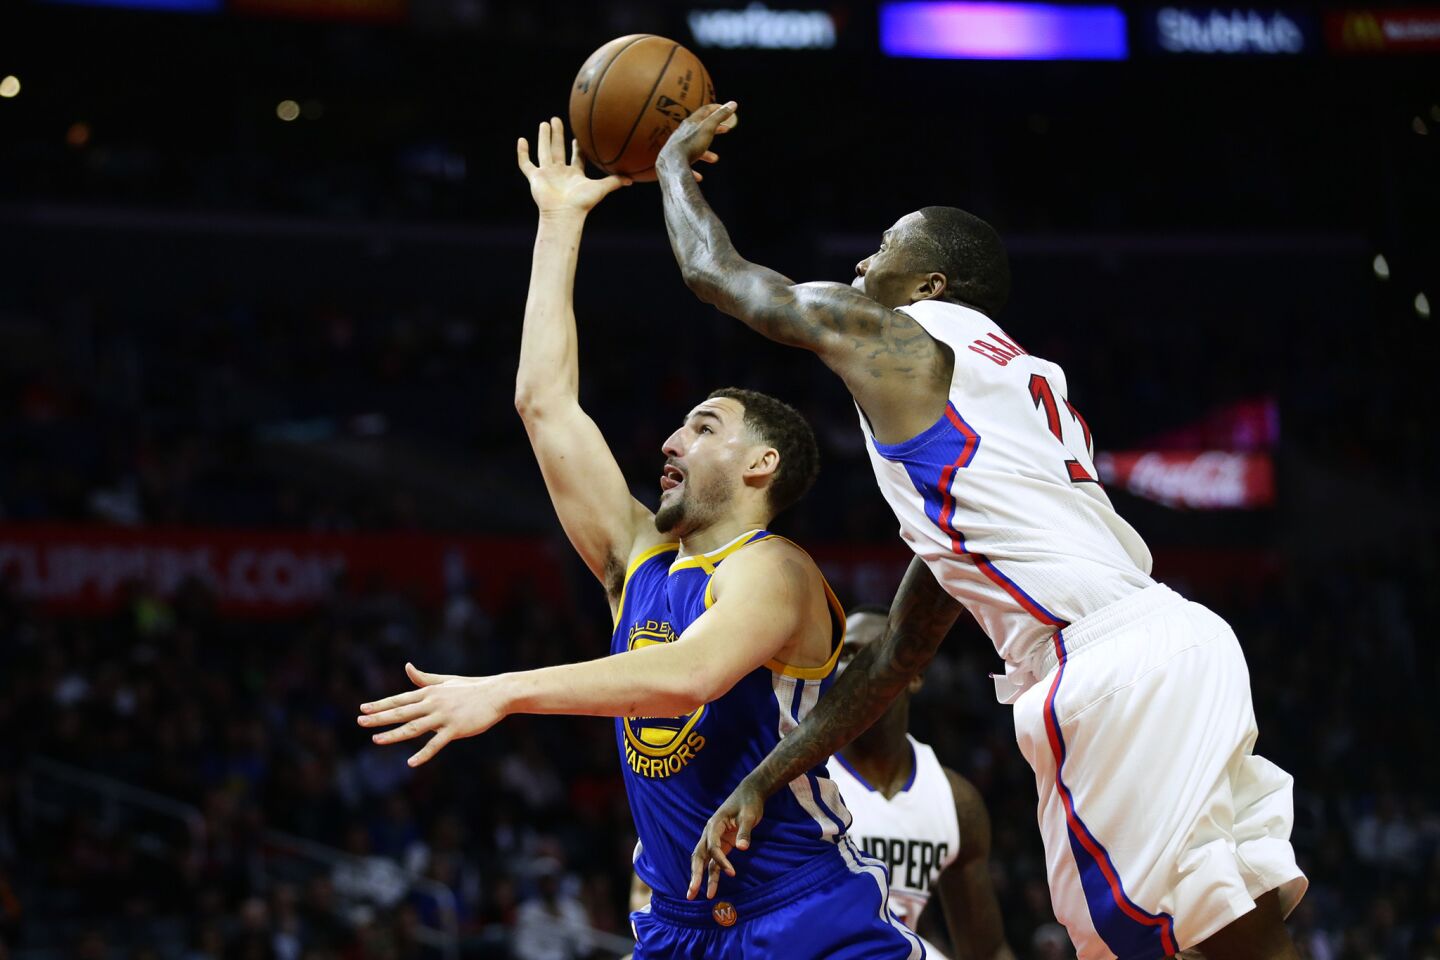 Clippers guard Jamal Crawford blocks a shot by Warriors guard Klay Thompson during the second half action.